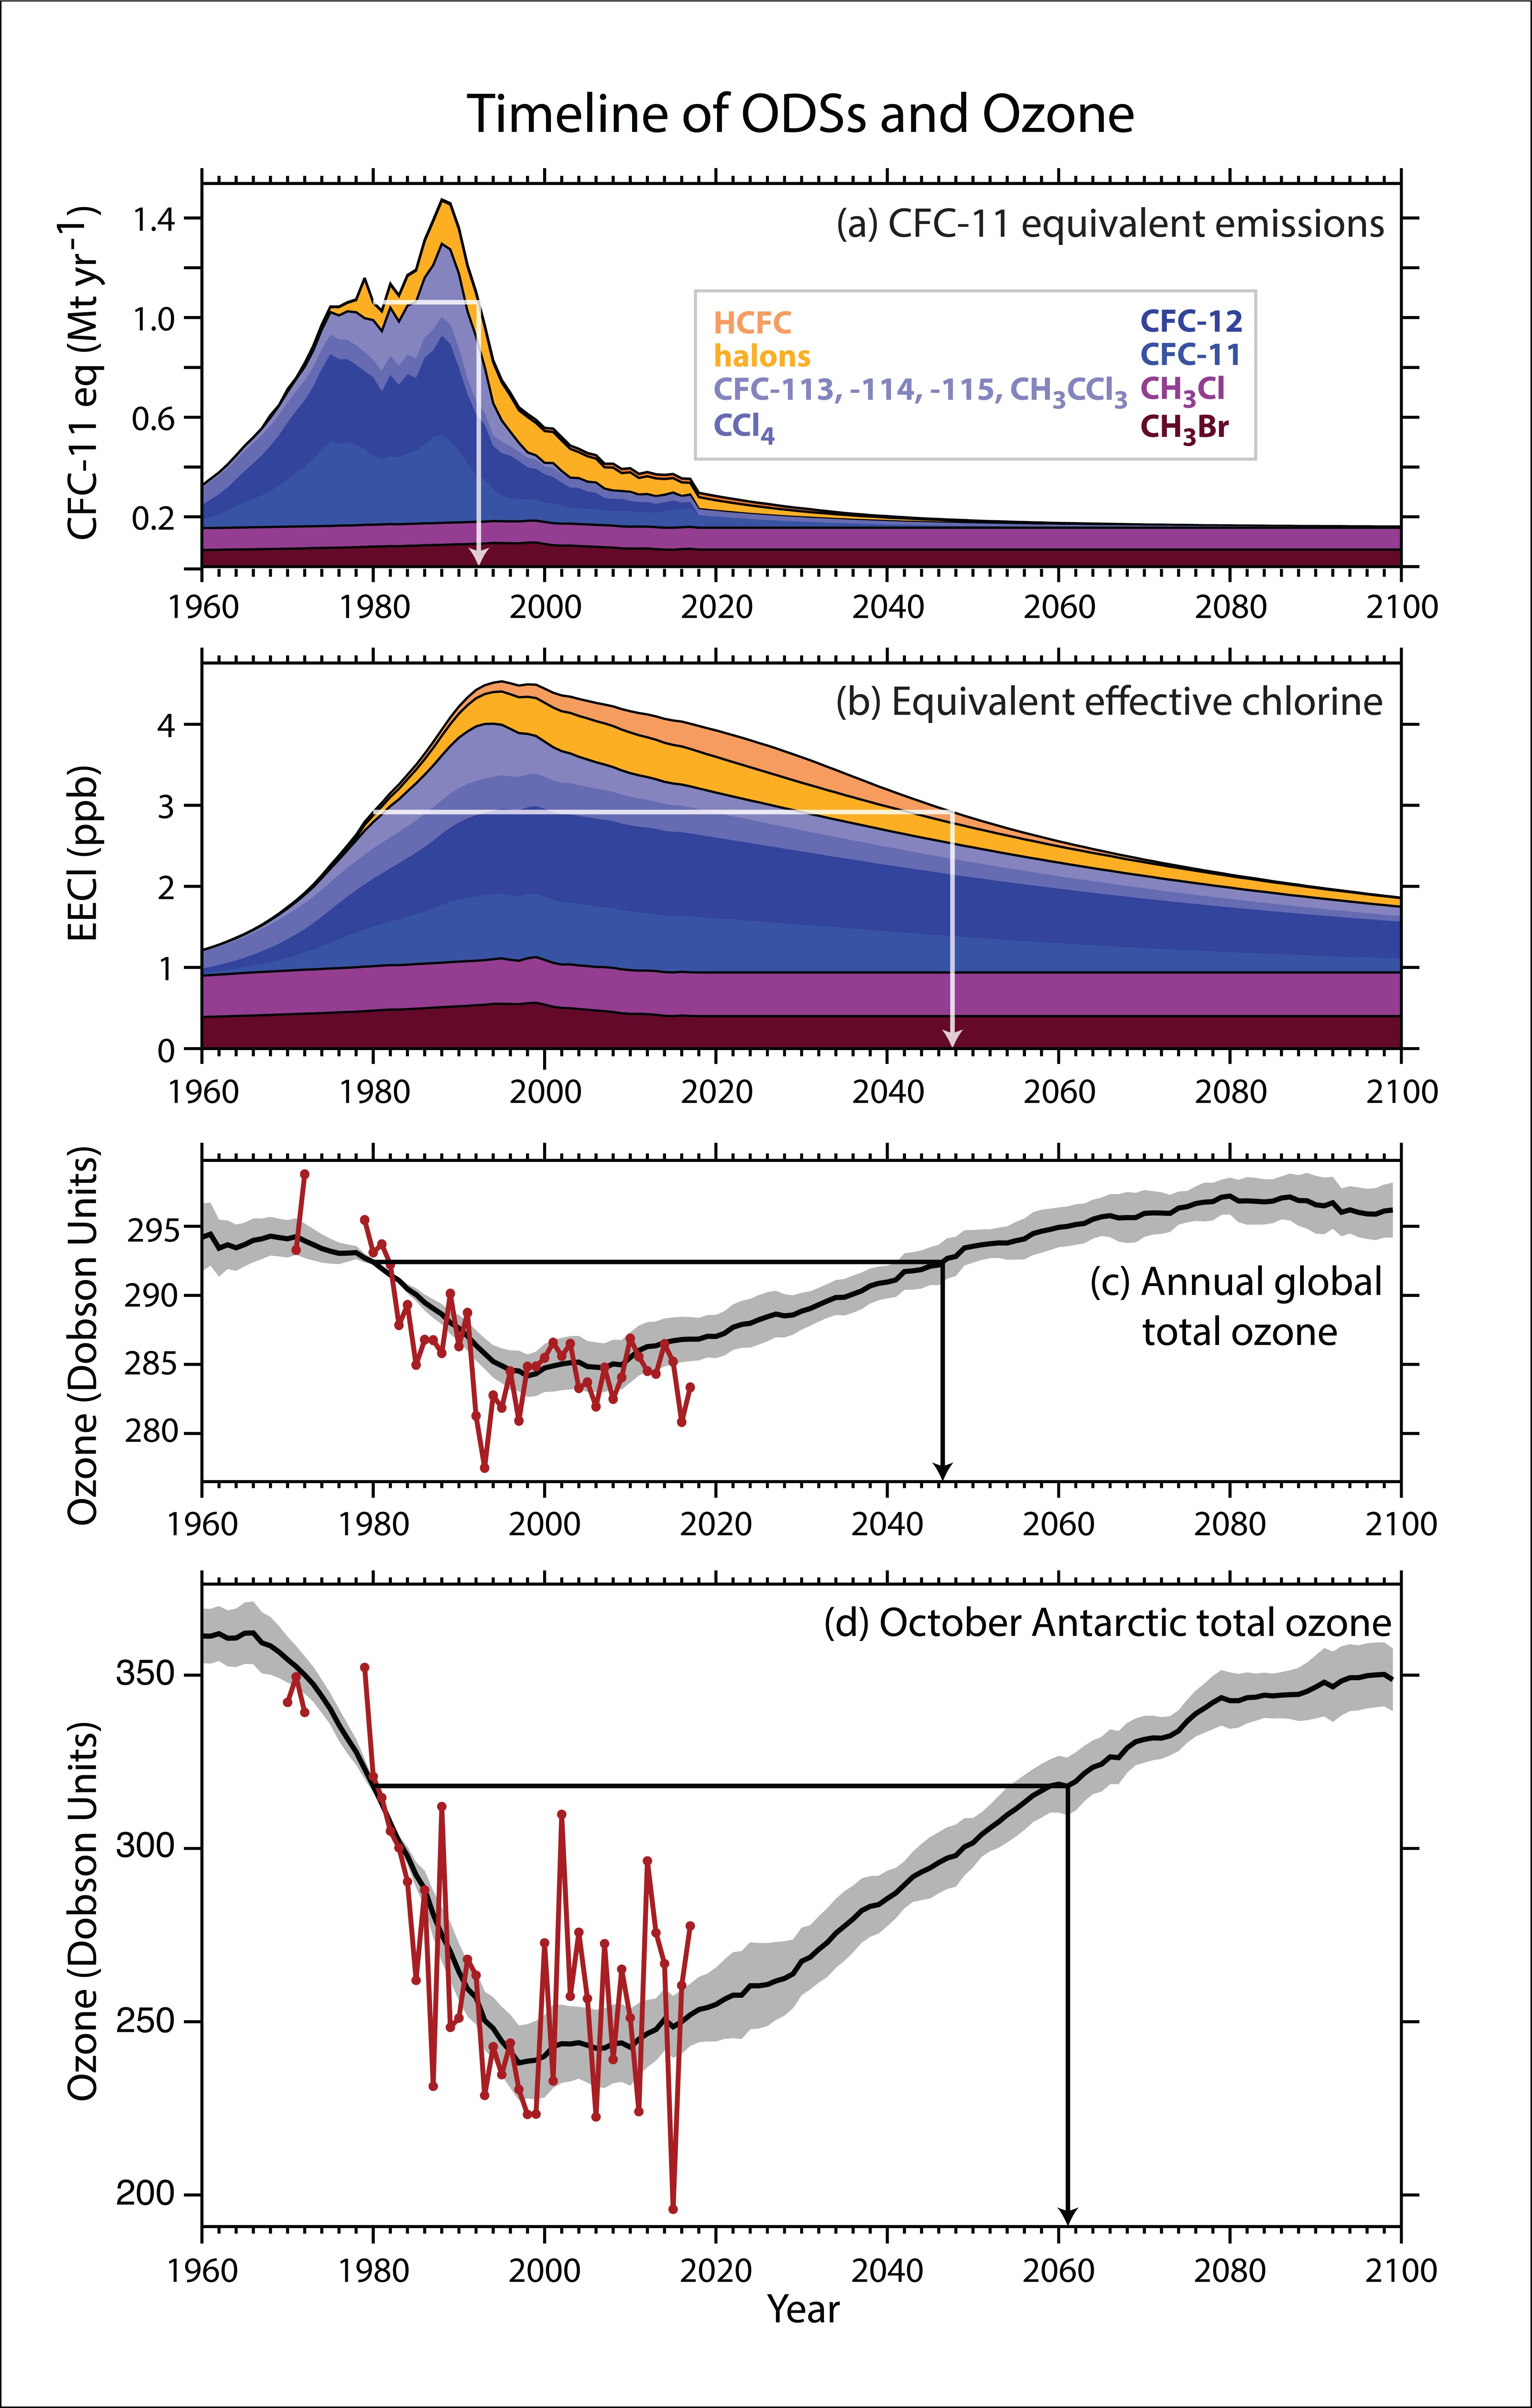 Timeline of ODSs and Ozone